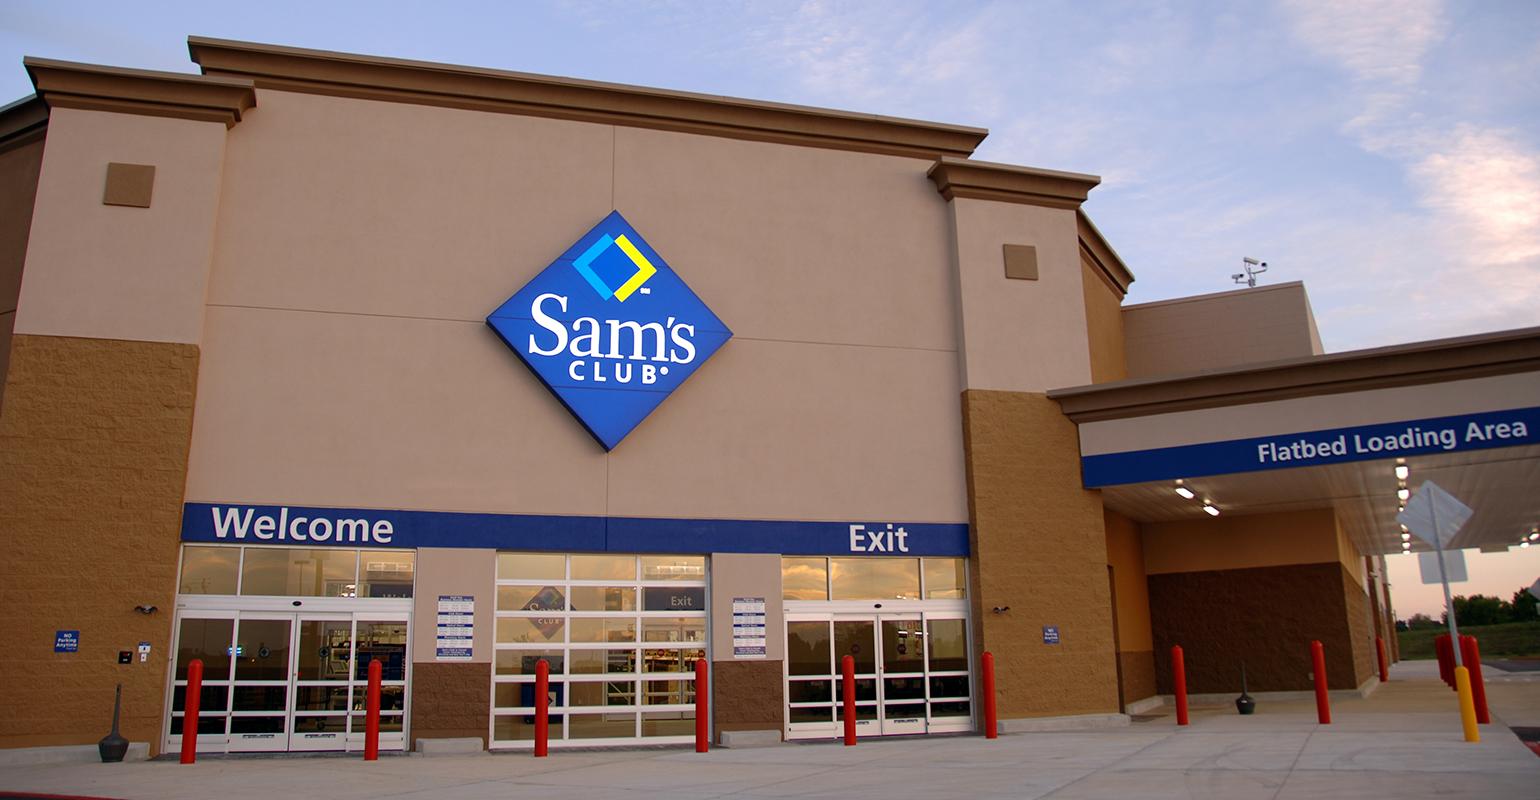 Sam’s Club starts sameday delivery with Instacart Supermarket News